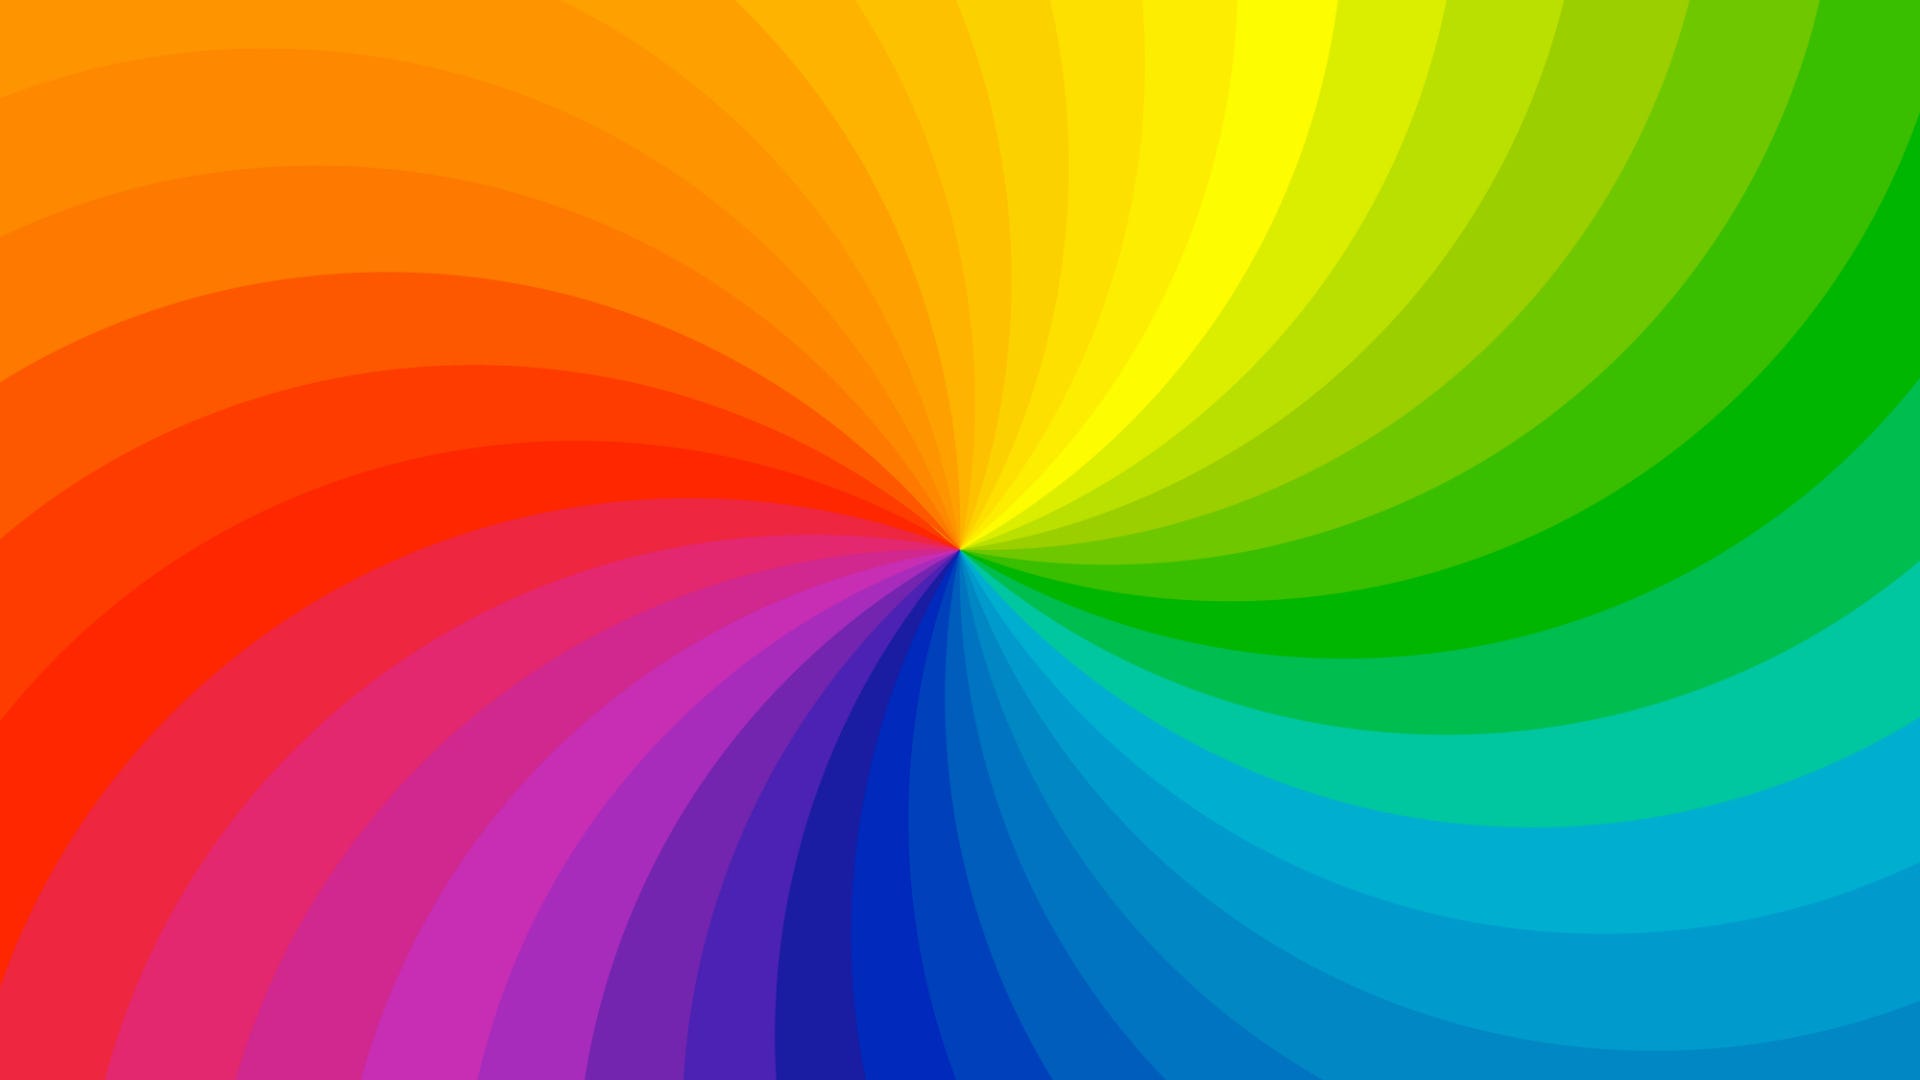 Everything you need to know about color | by Monica Galvan | UX Collective